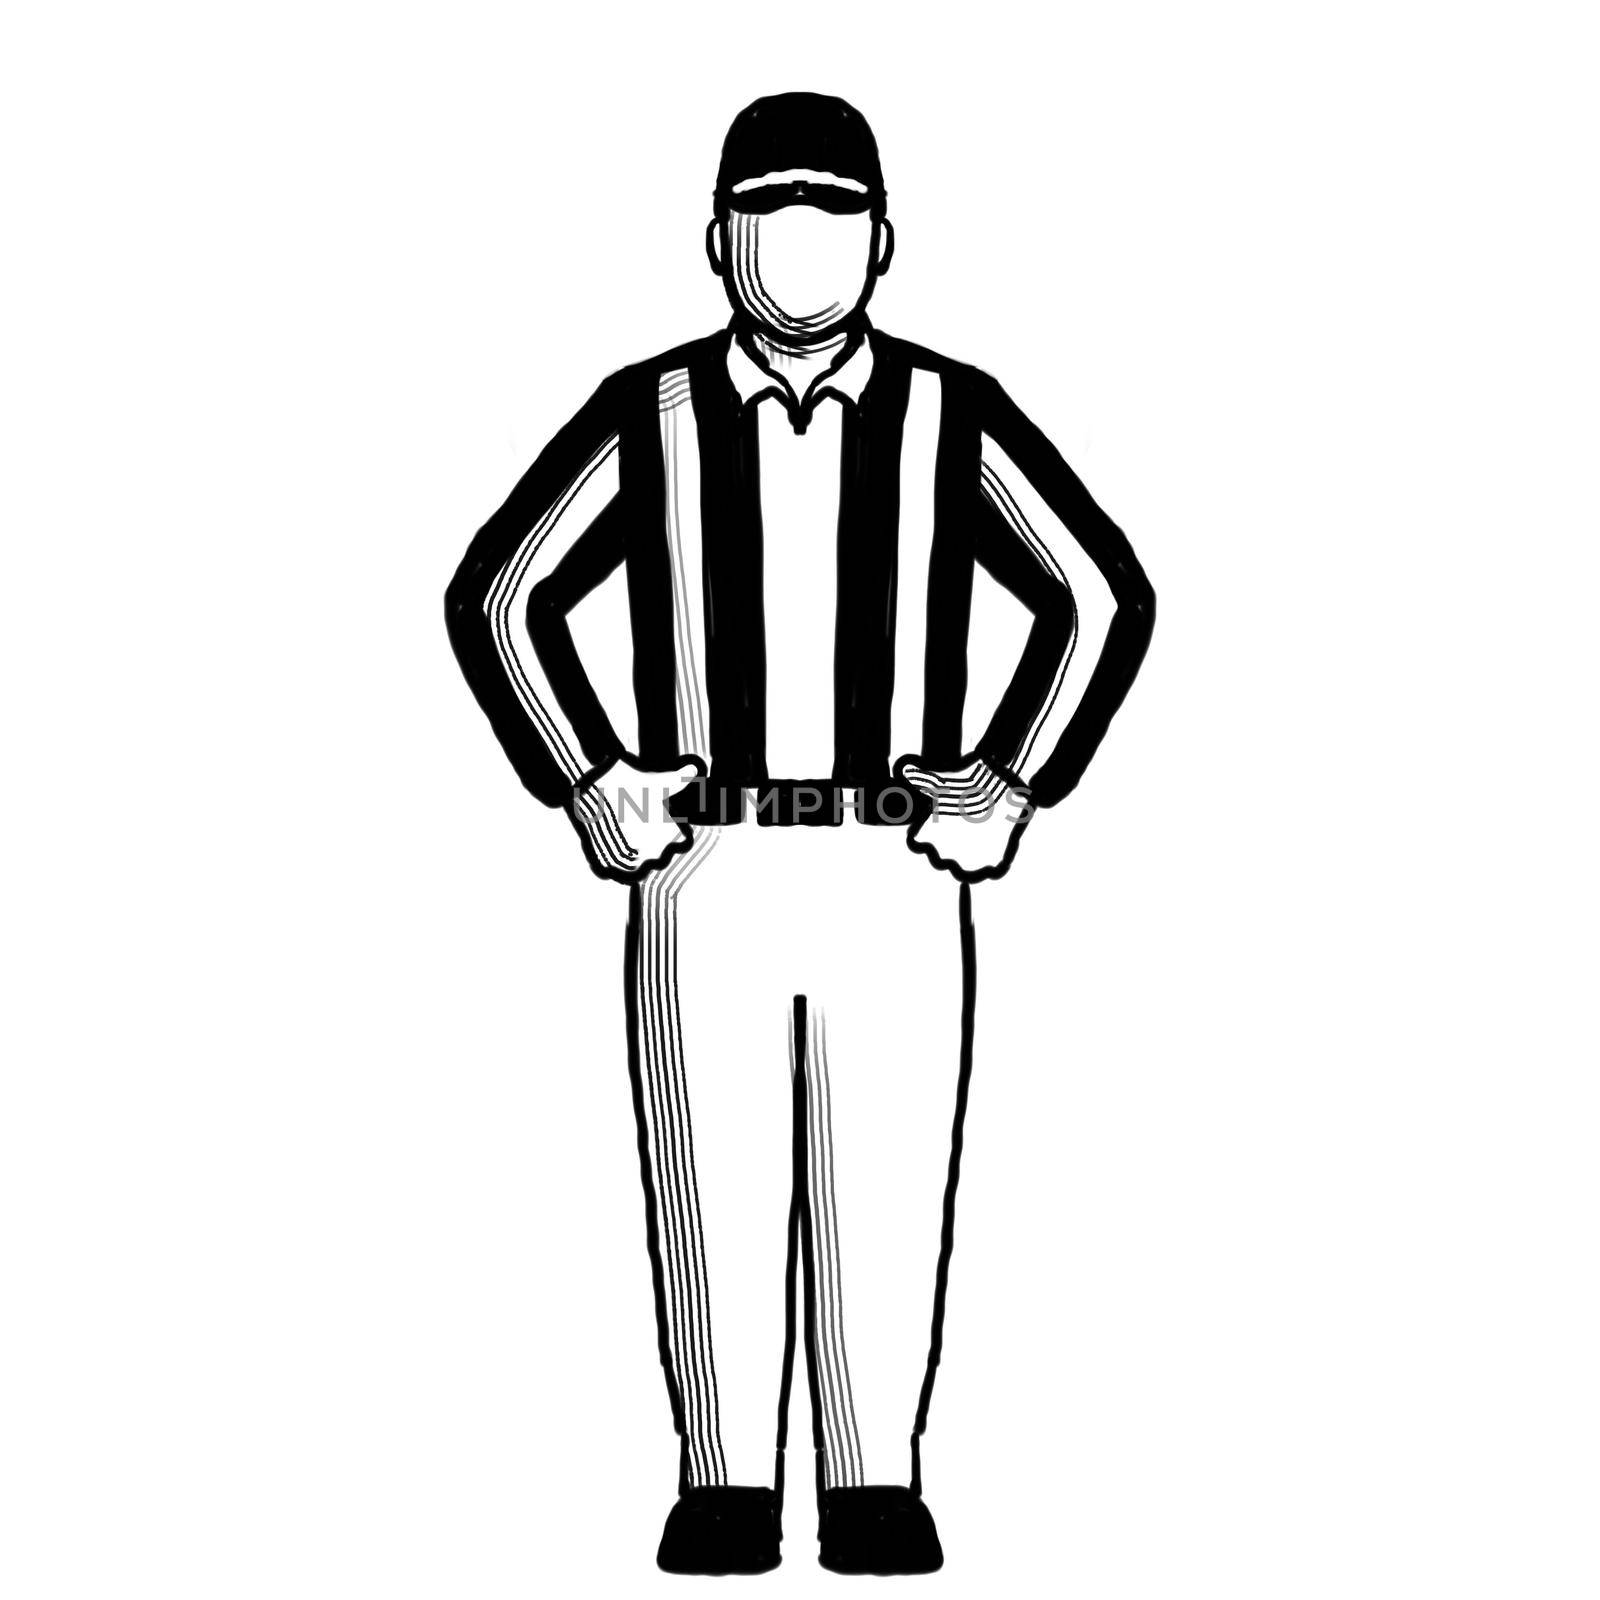 Retro style illustration of an American football referee or official with hand signal showing penalty refused, incomplete pass, missed field goal sign done in black and white.